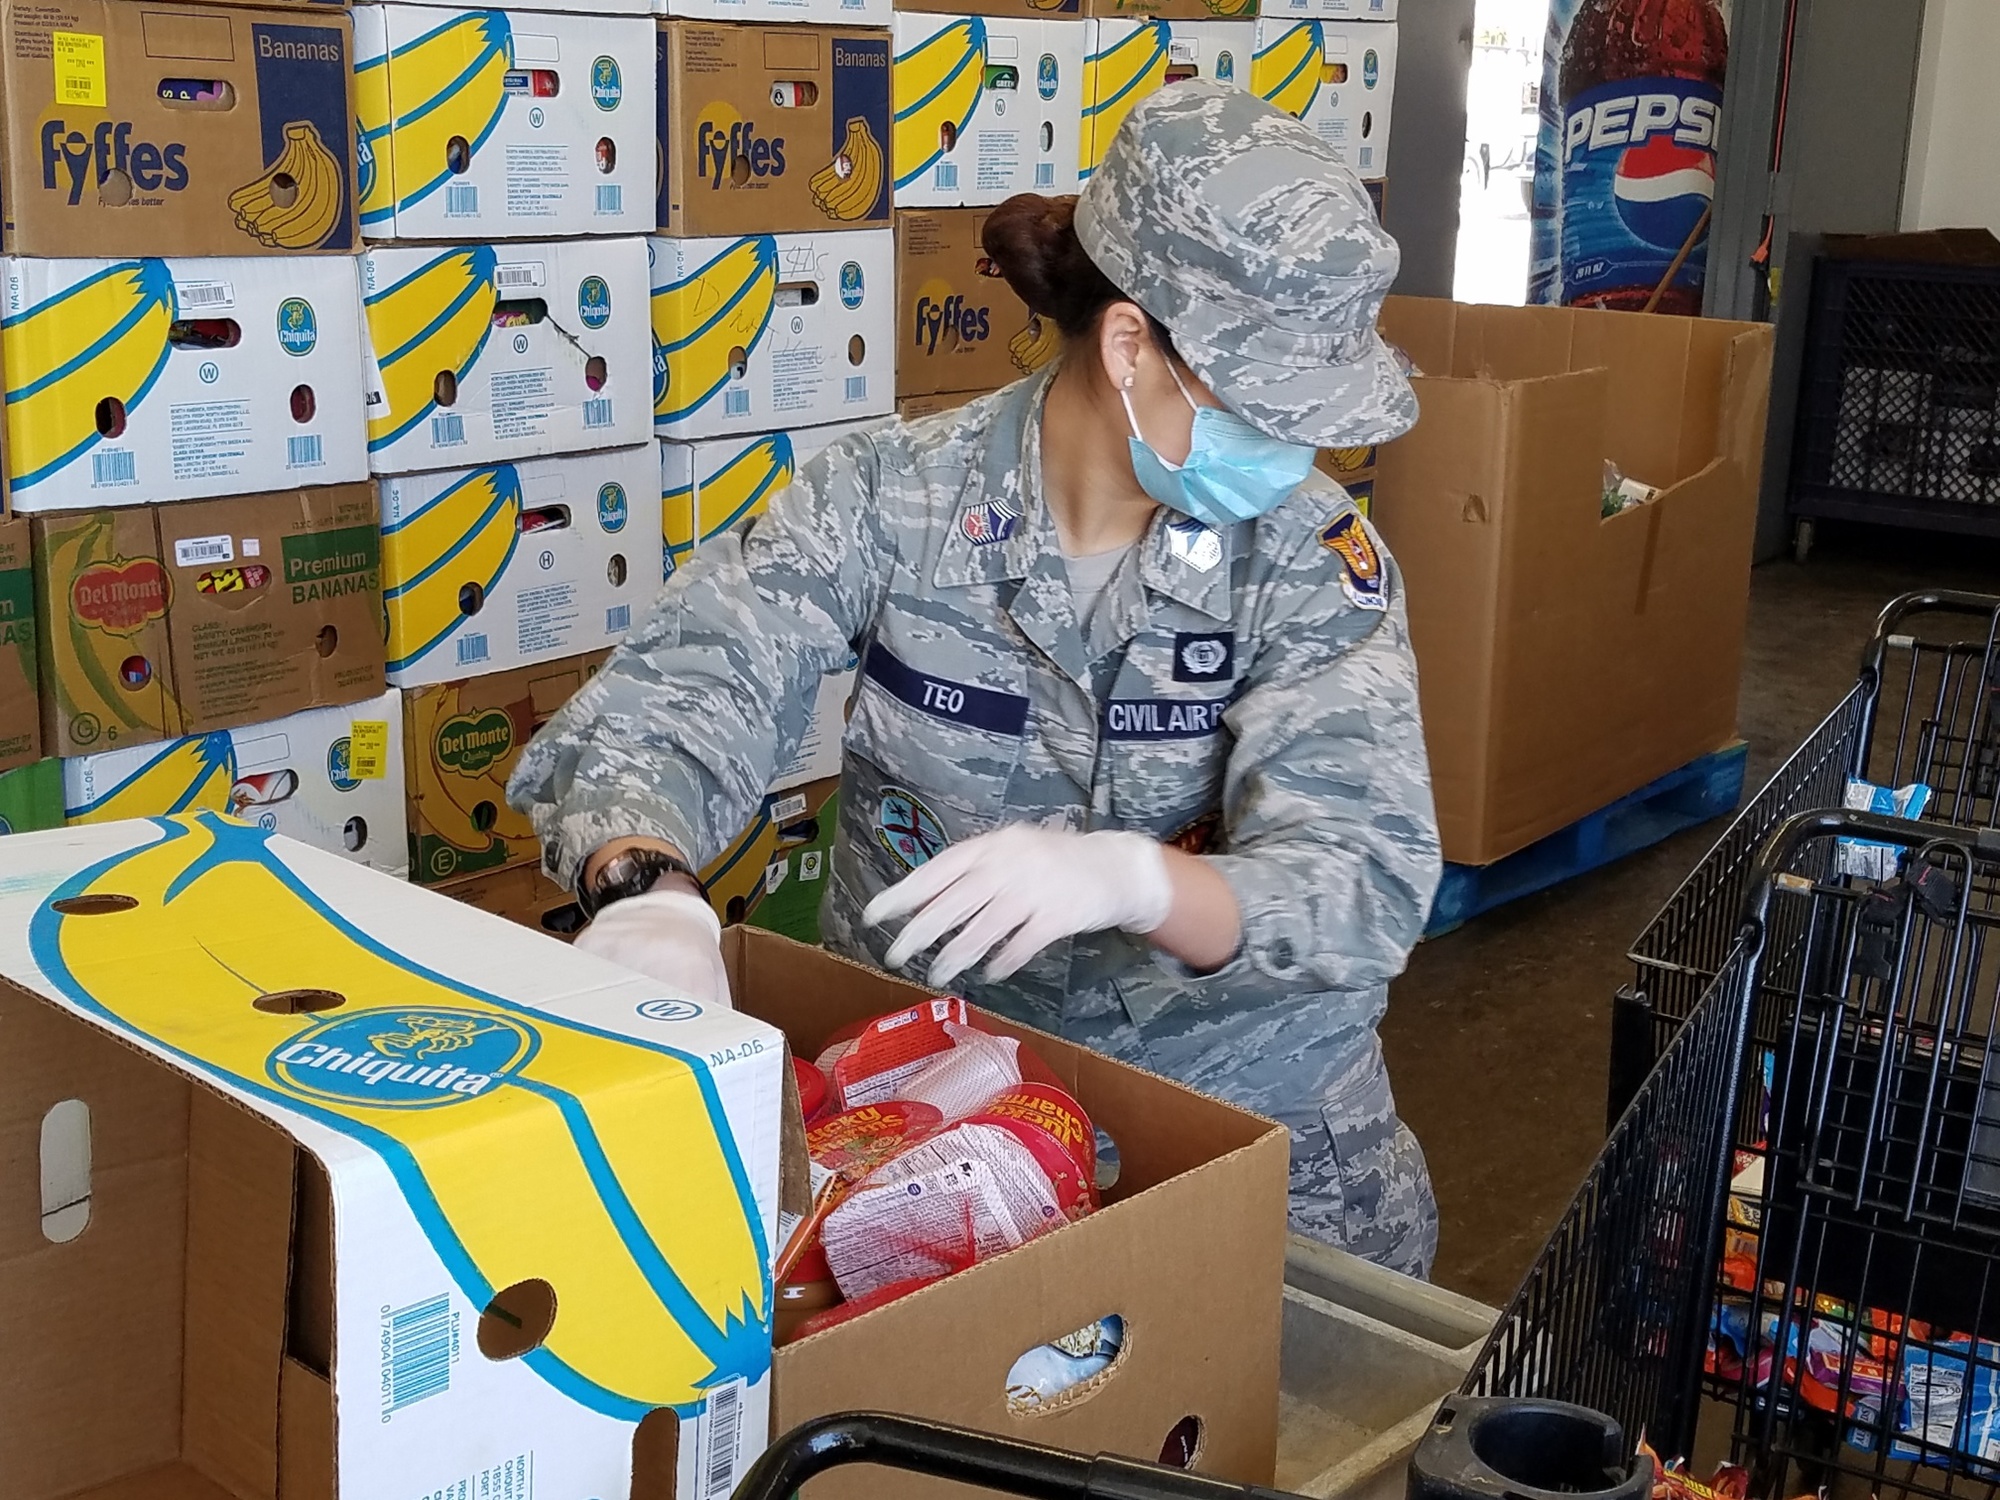 C/CMSgt Emma Teo putting the finishing touches on the food boxes. Photo credit: Lt Col Gary Gross, Col Shorty Powers Composite Squadron